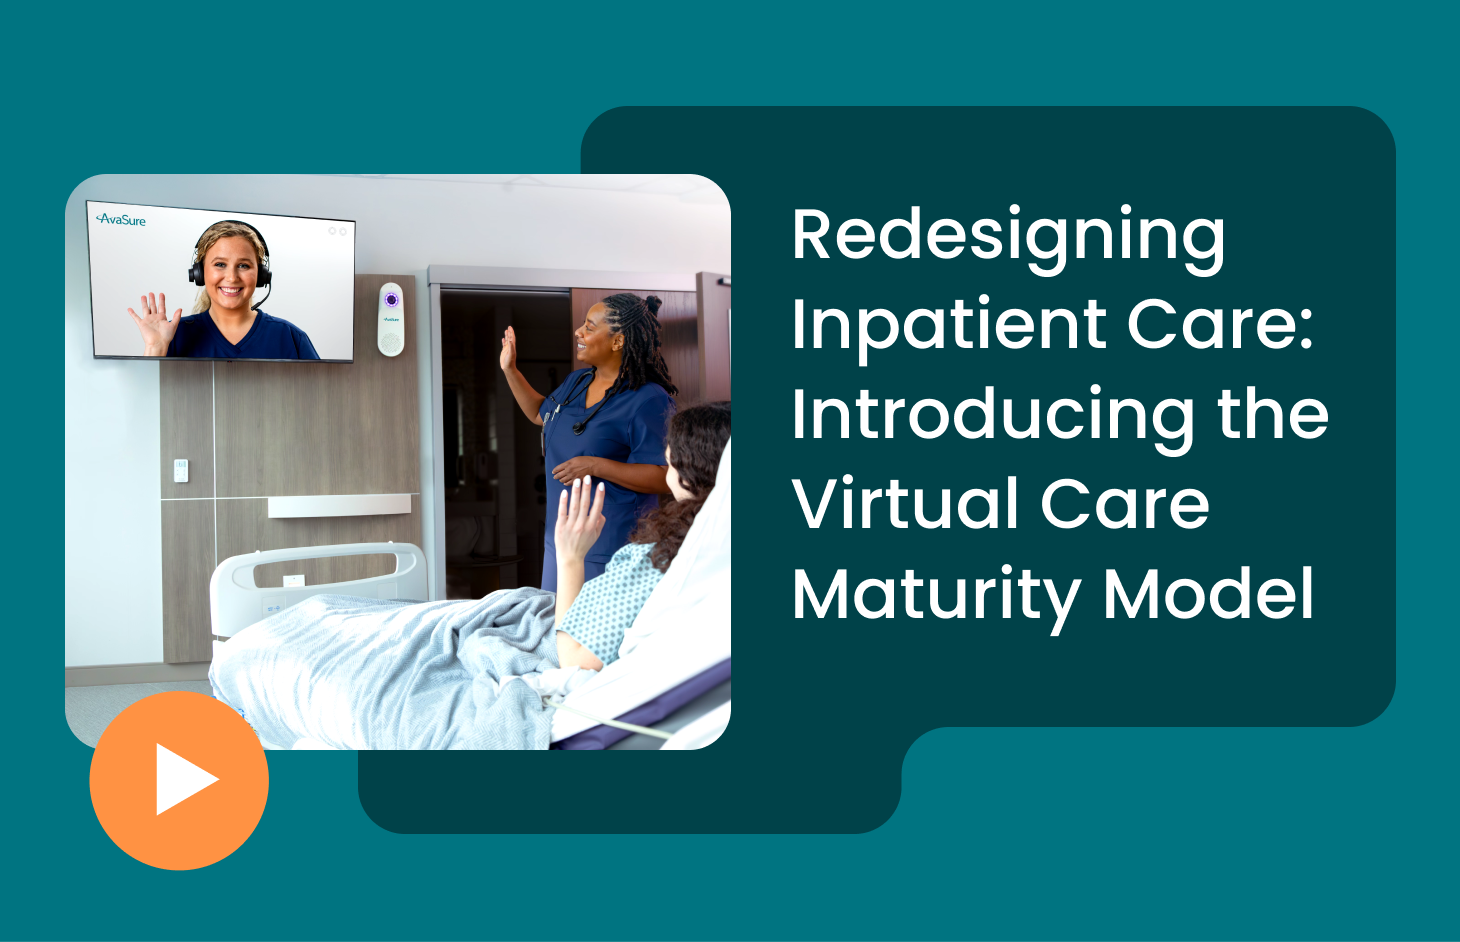 Redesigning Inpatient Care: Introducing the Virtual Care Maturity Model